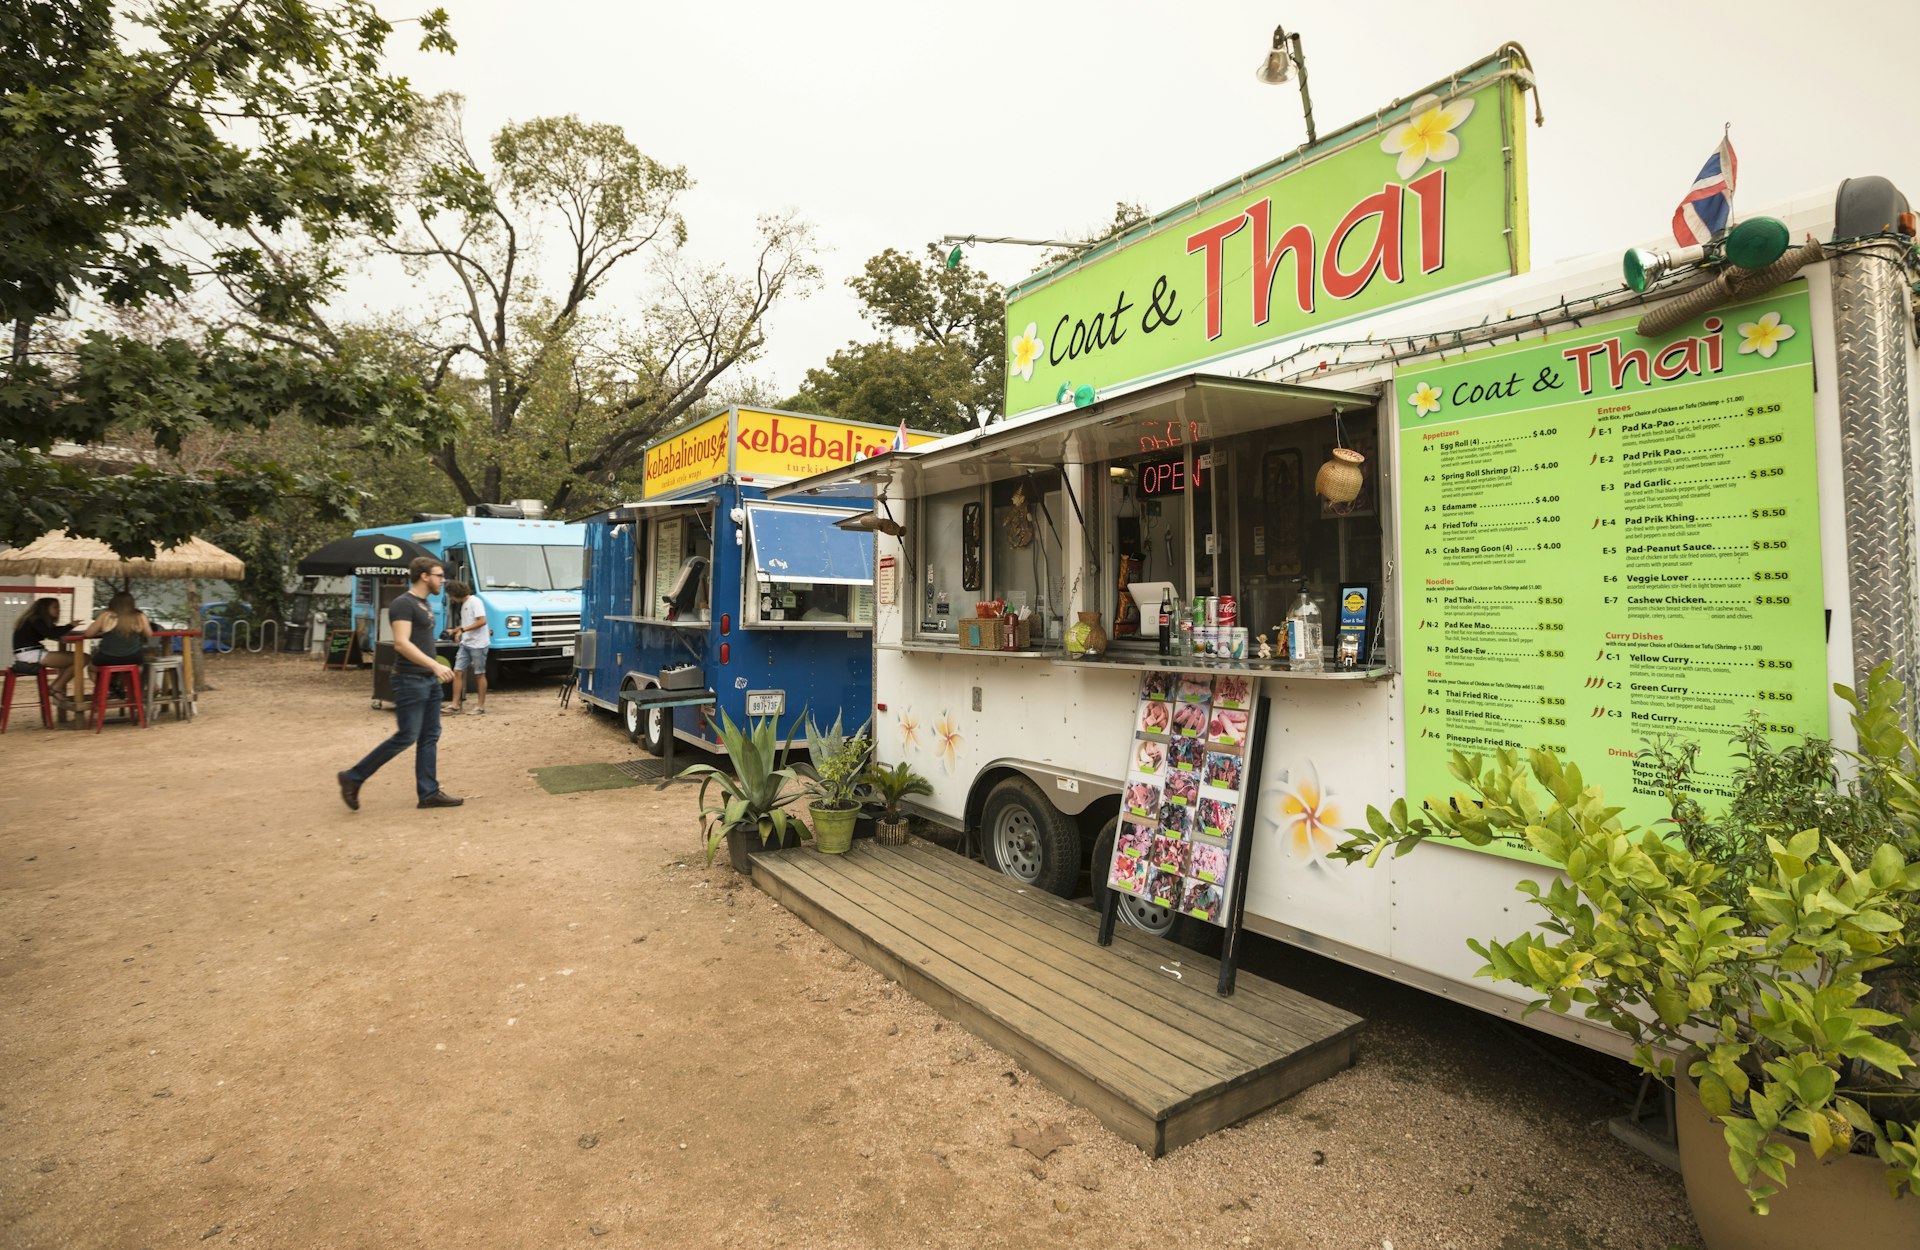 Food truck restaurants lined up in Austin Texas